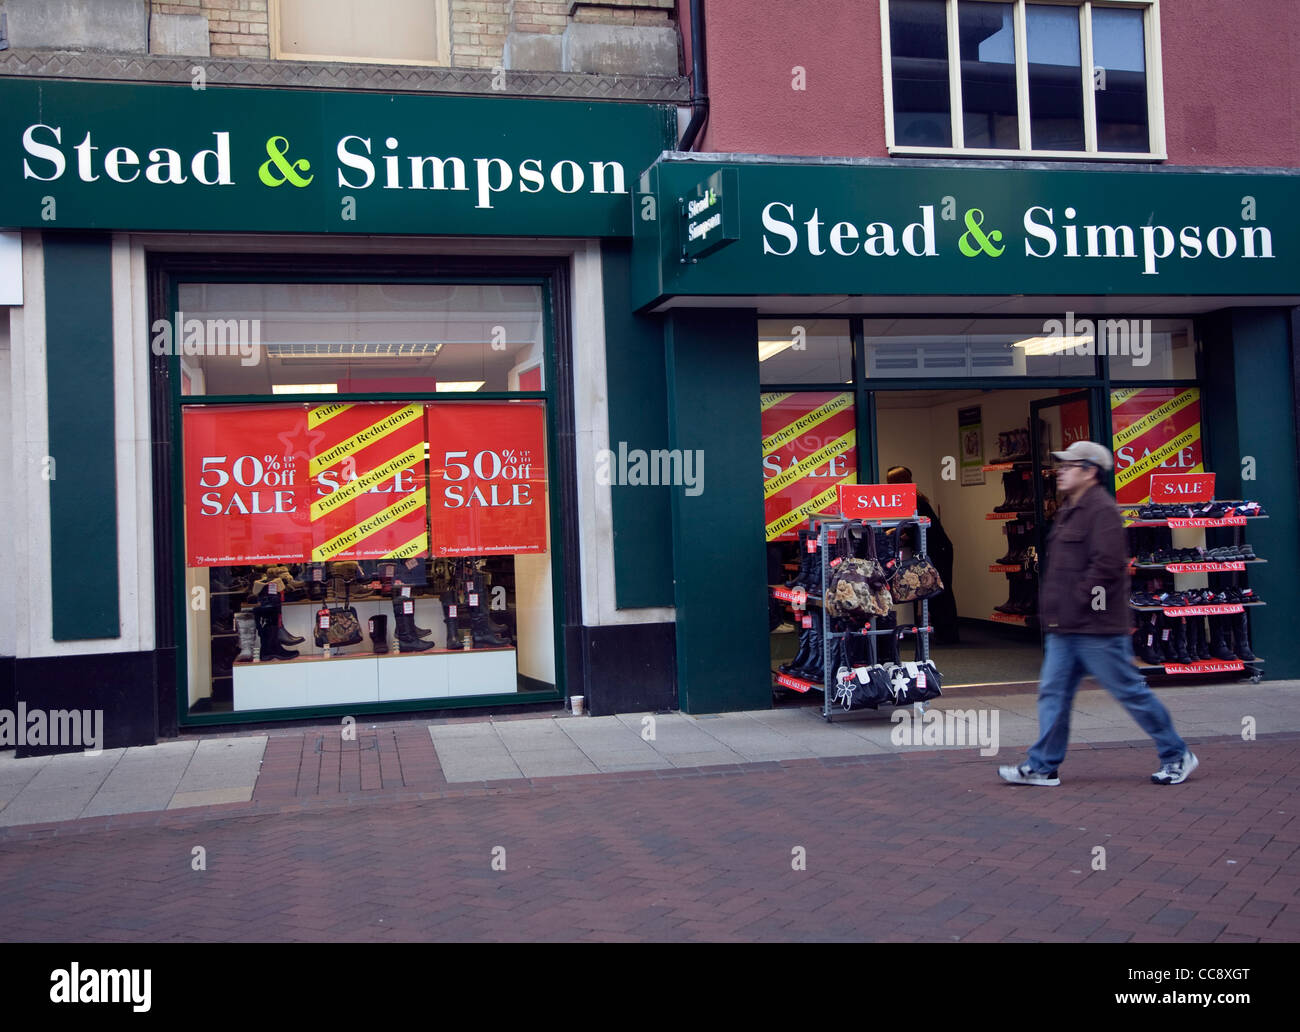 Stead and Simpson shop January sale Stock Photo